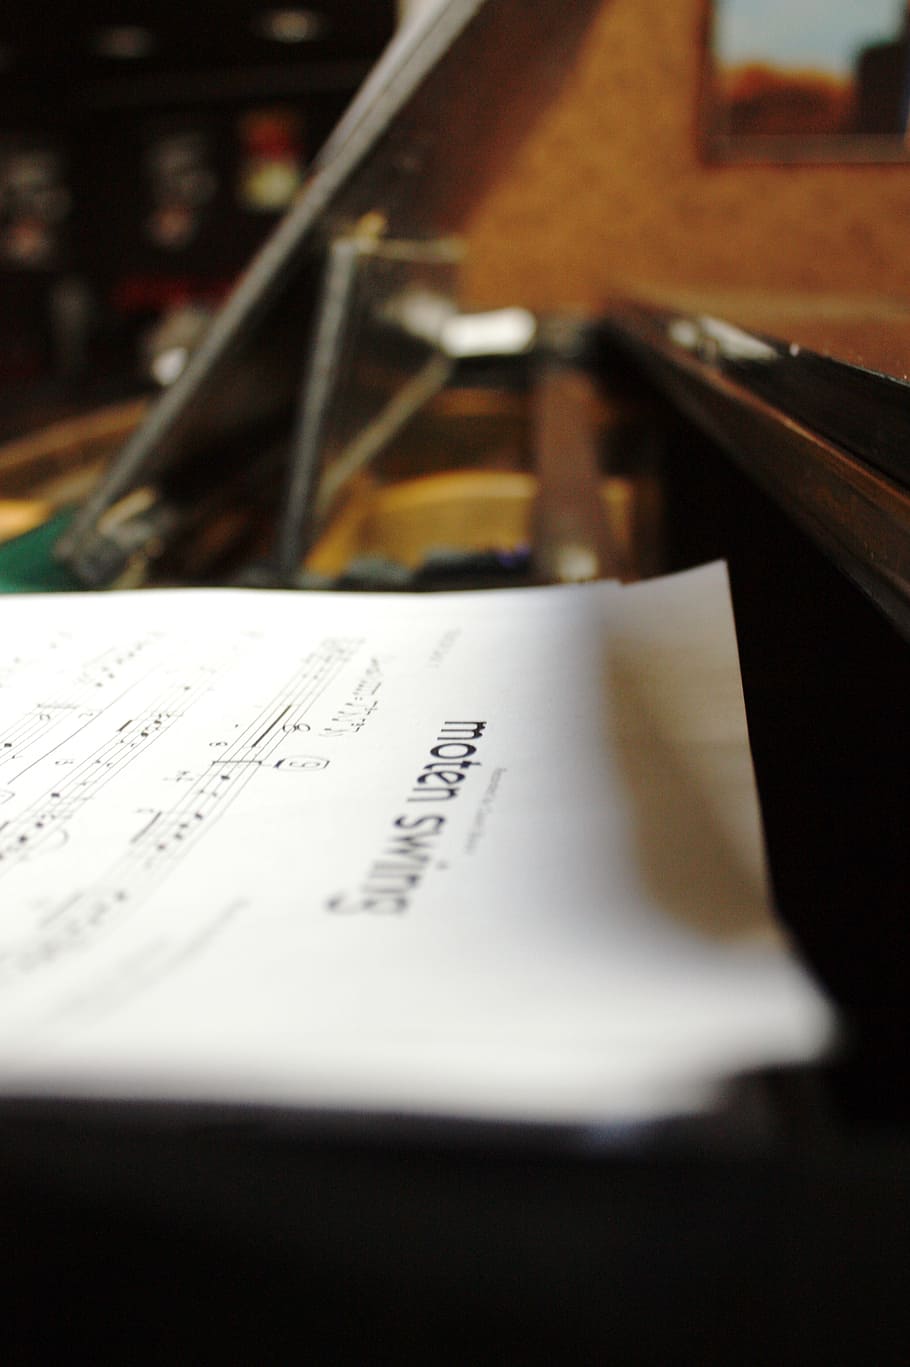 scores, piano, musician, music, man, jazz, play, instrument, orchestra, paper